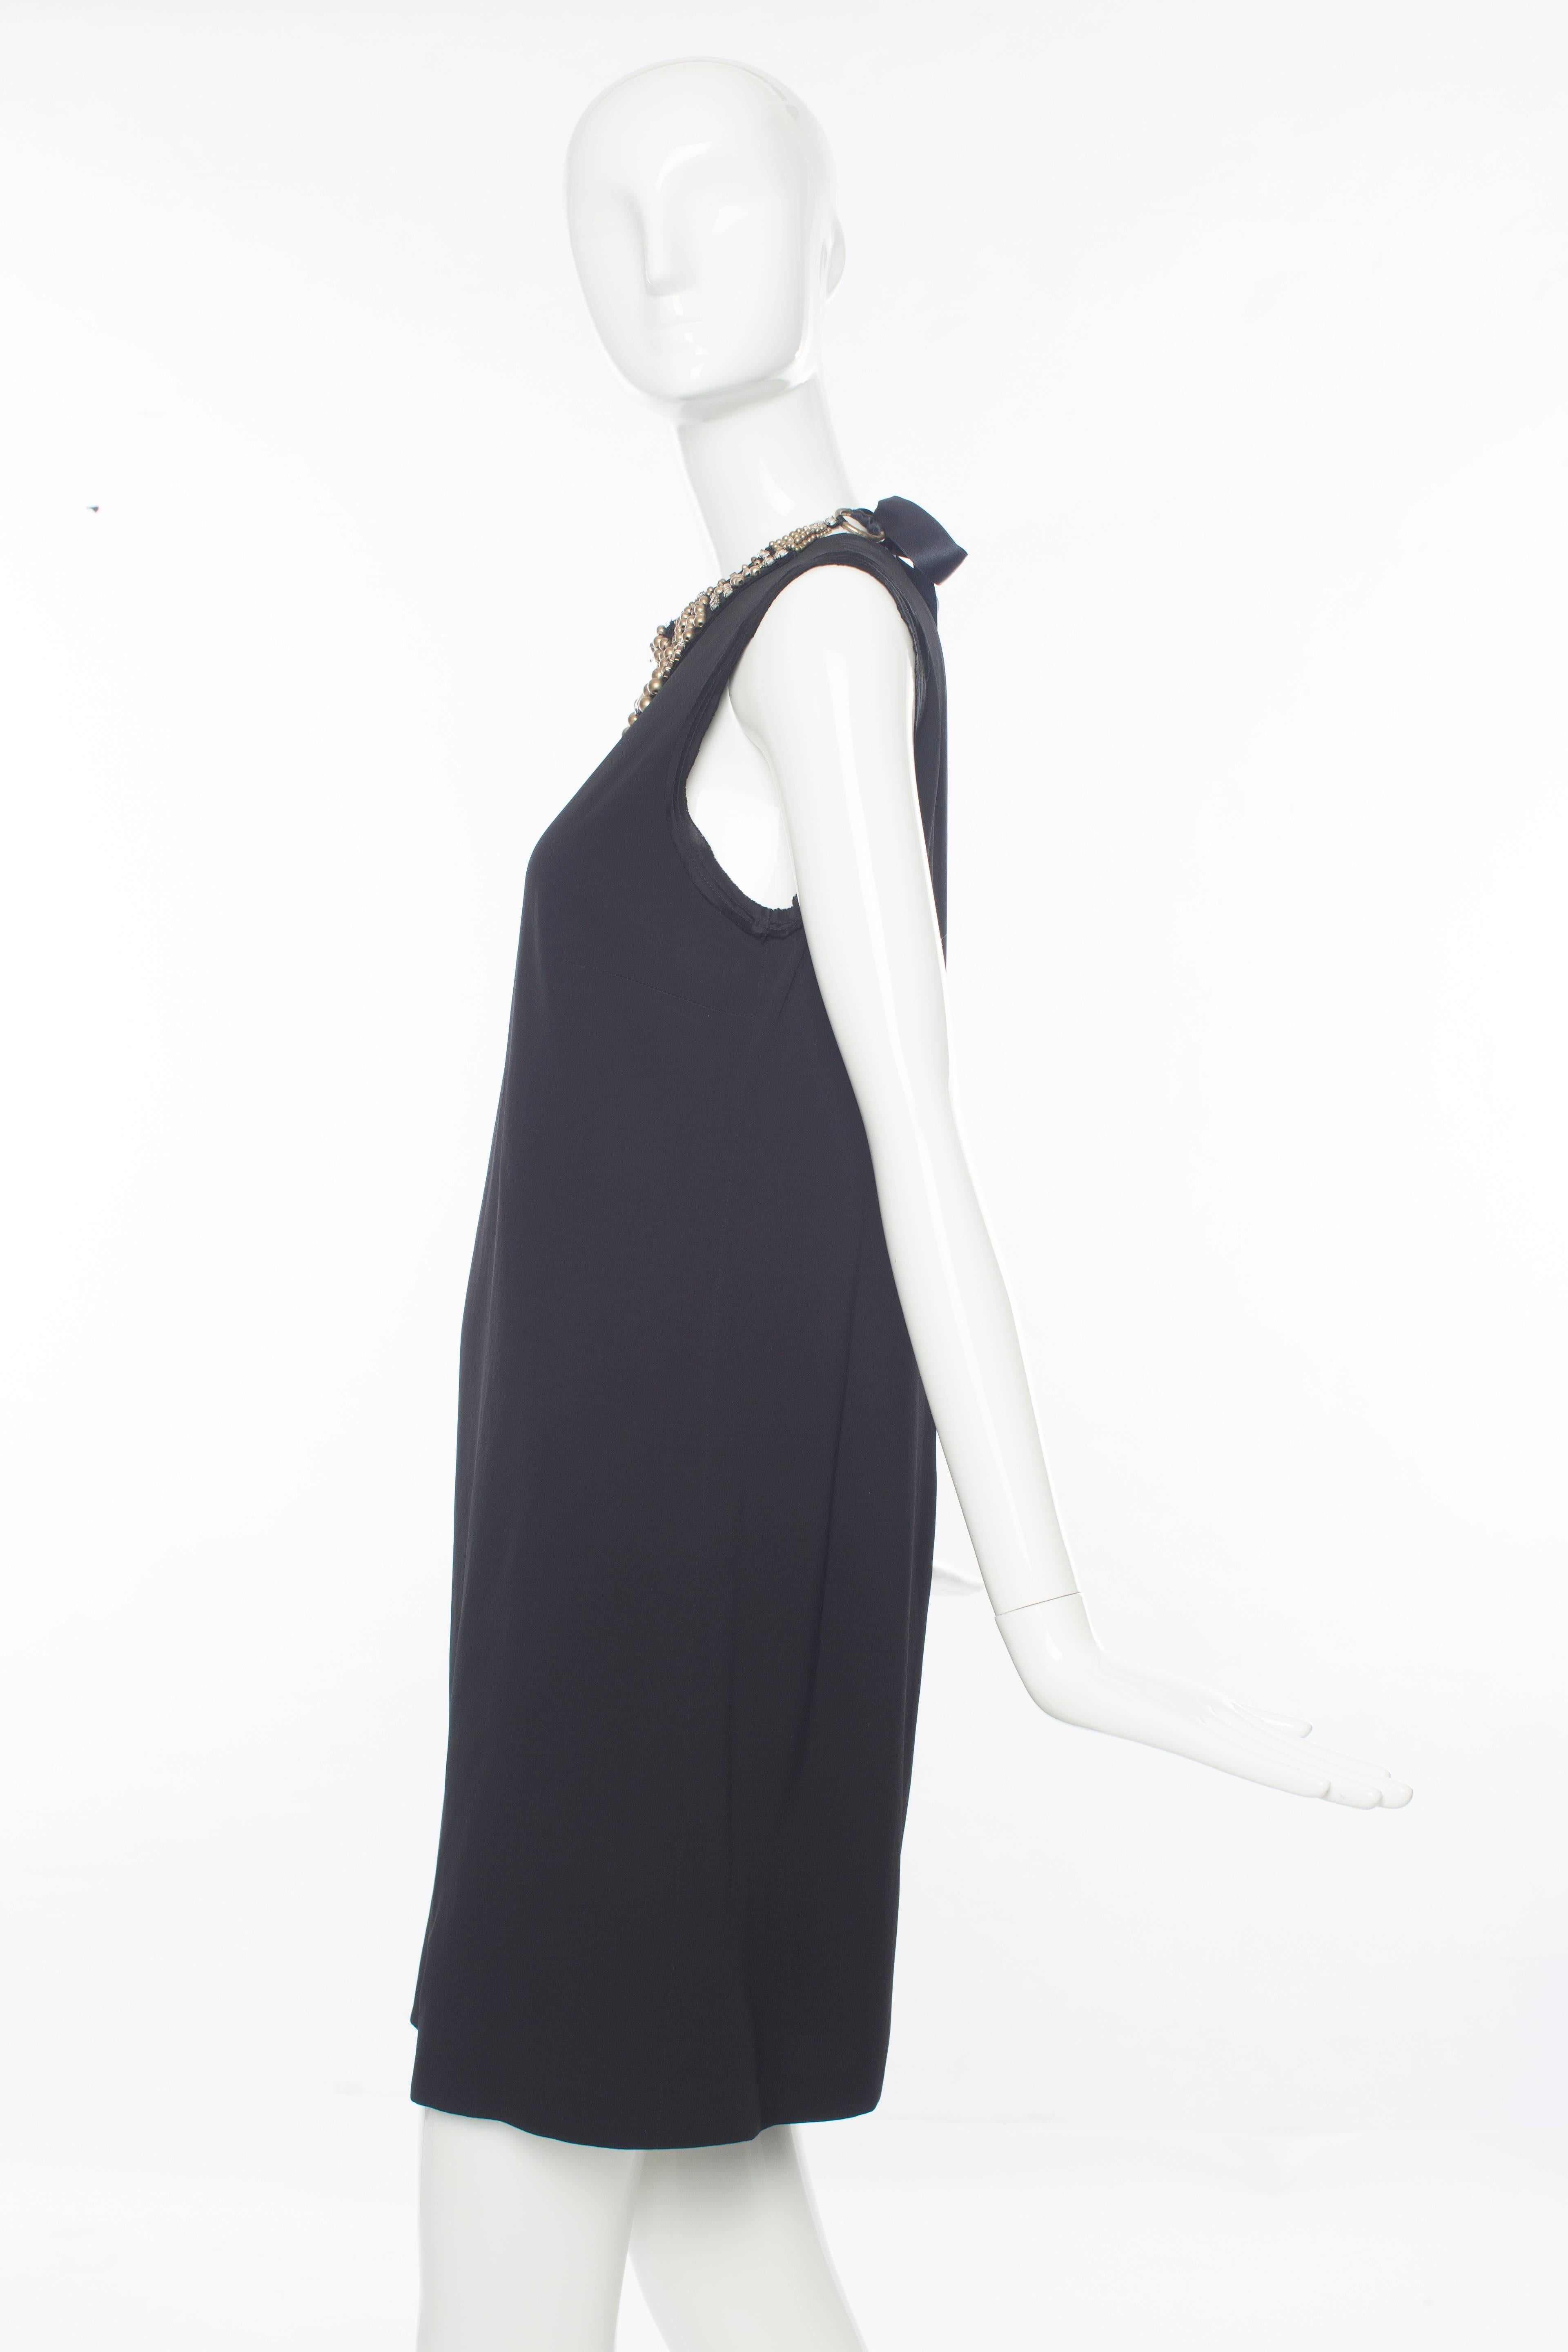 Alber Elbaz for Lanvin, Fall 2007, black sleeveless viscose sheath dress, antiqued silver and prong-set embellished collar, concealed back zip and snap closure, fully lined in silk.

FR. 38
US. 6

Bust 34, Waist 34, Hips 37, Length 35